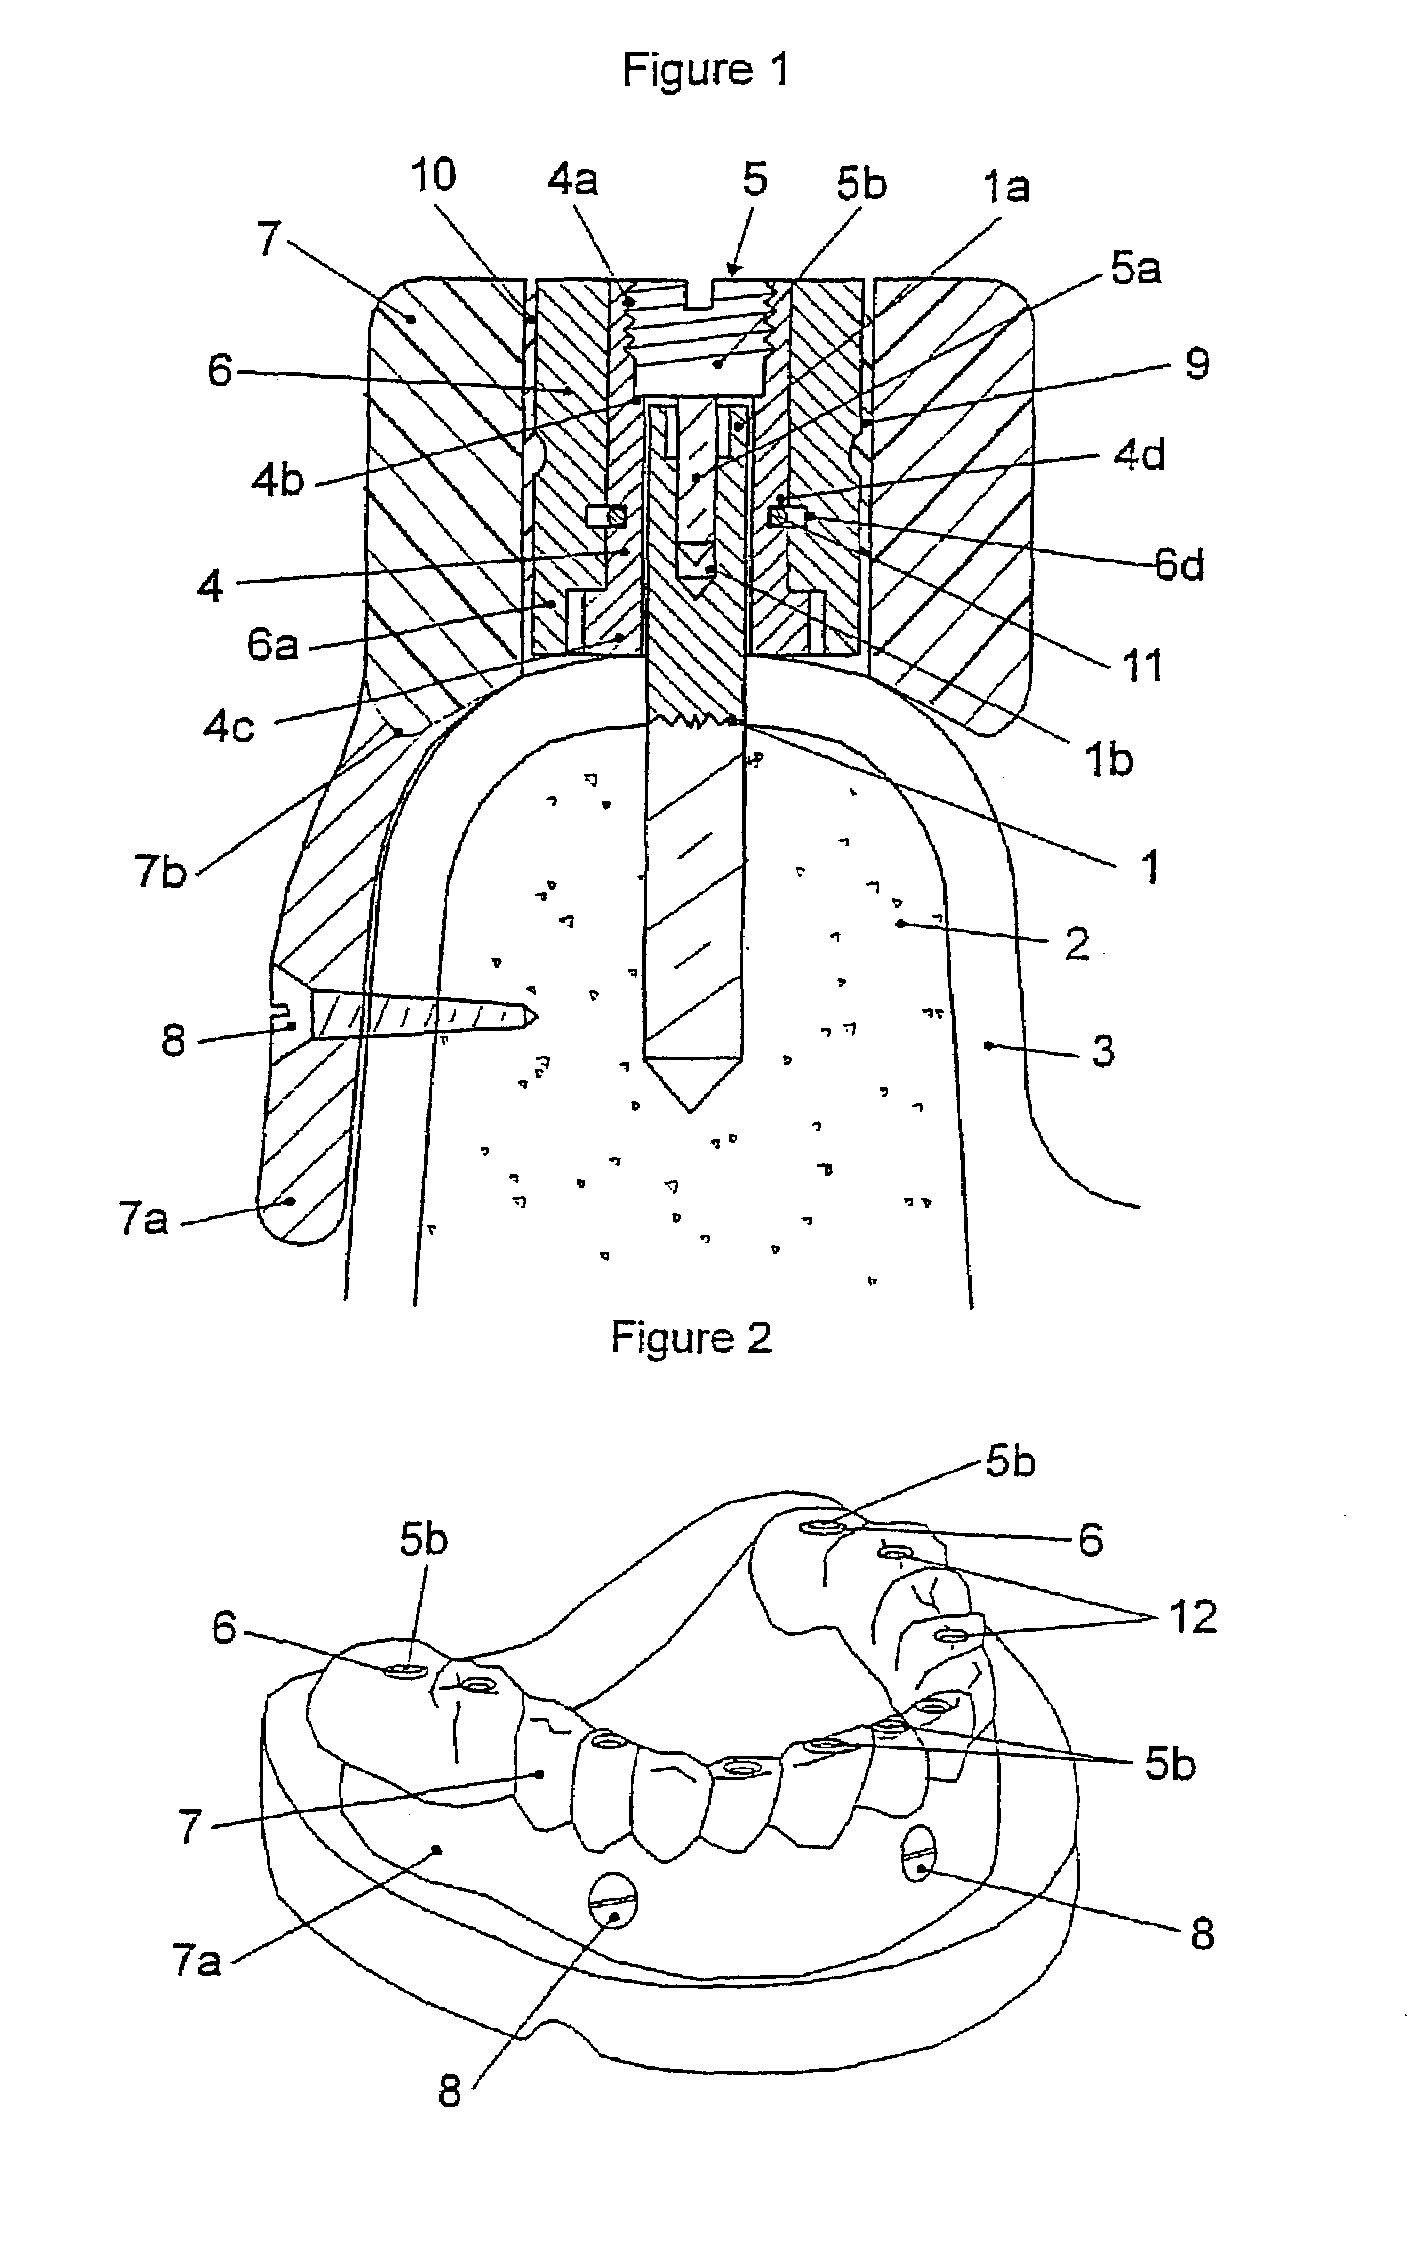 Positioning device for fitting implant-supported dental prostheses